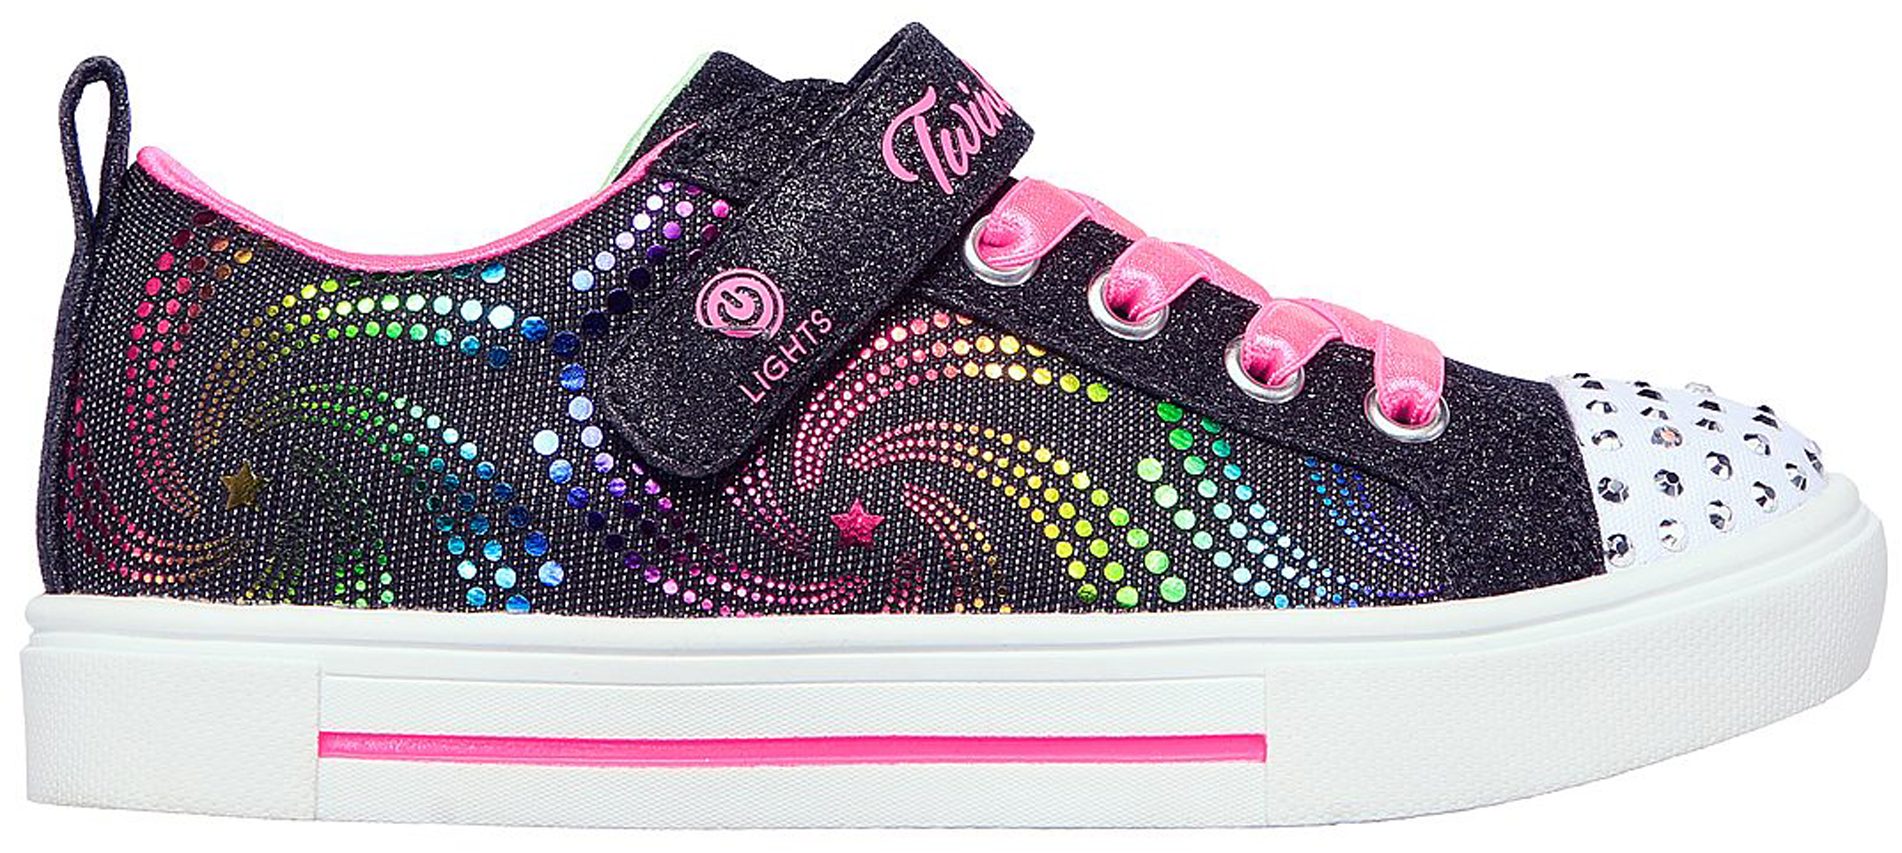 Hassy Hectares Ban Skechers Twinkle Toes: Twinkle Sparks Black / Multi 314795L BKMT - Girls  Trainers - Humphries Shoes